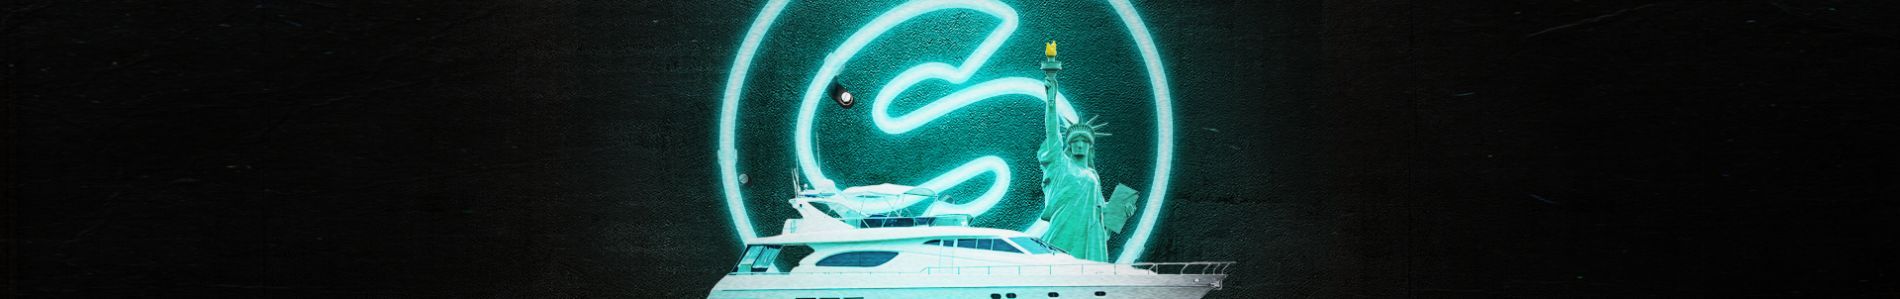 Spinnin' Sessions Spinnin' Sessions Yacht Cruise | New York City